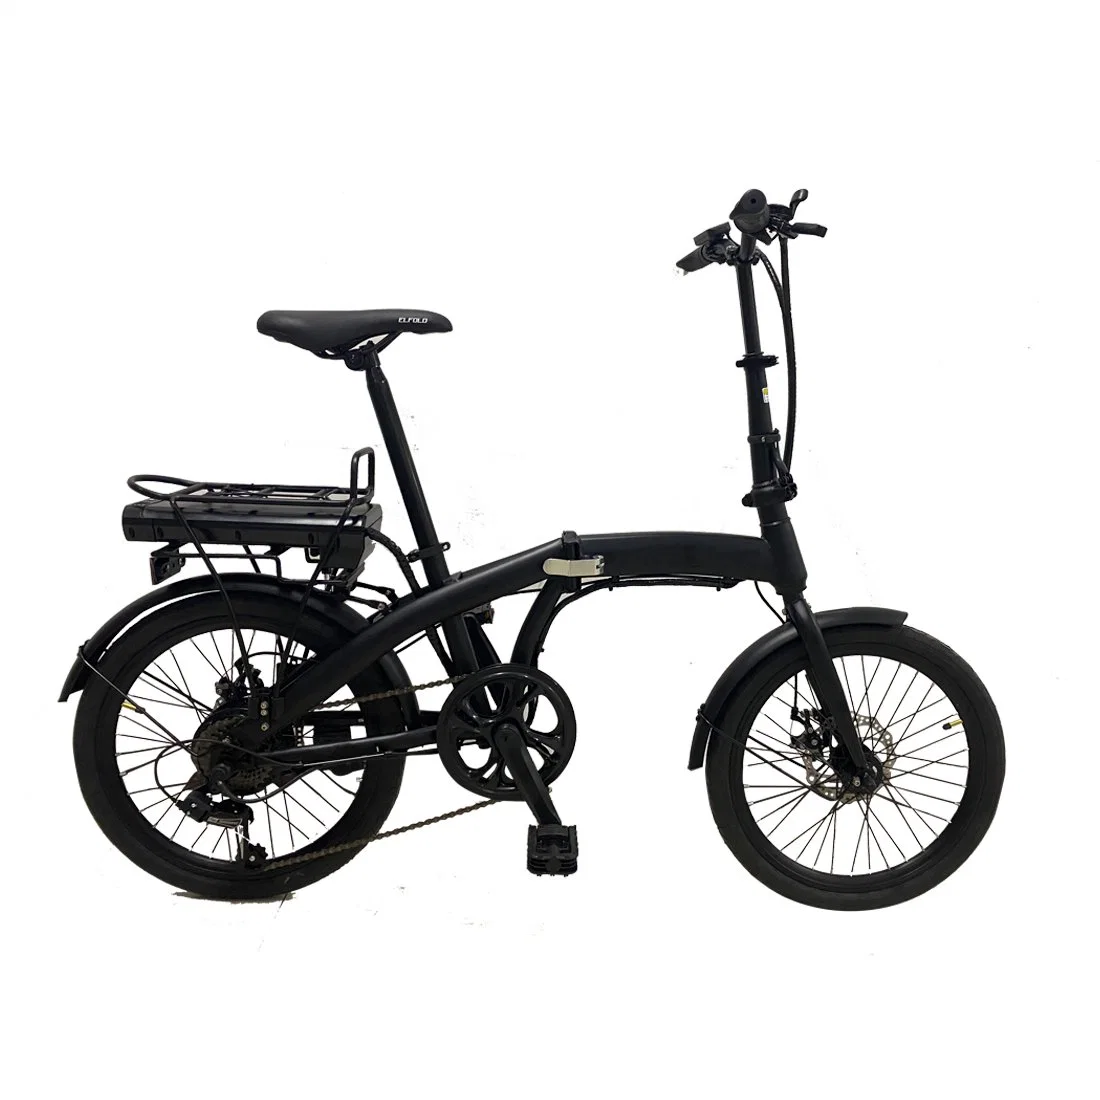 Promotion Price 250W High-Speed Drive Electric Wagon with Pedals Adjustable Stem Riser Electric Beach Bicycle